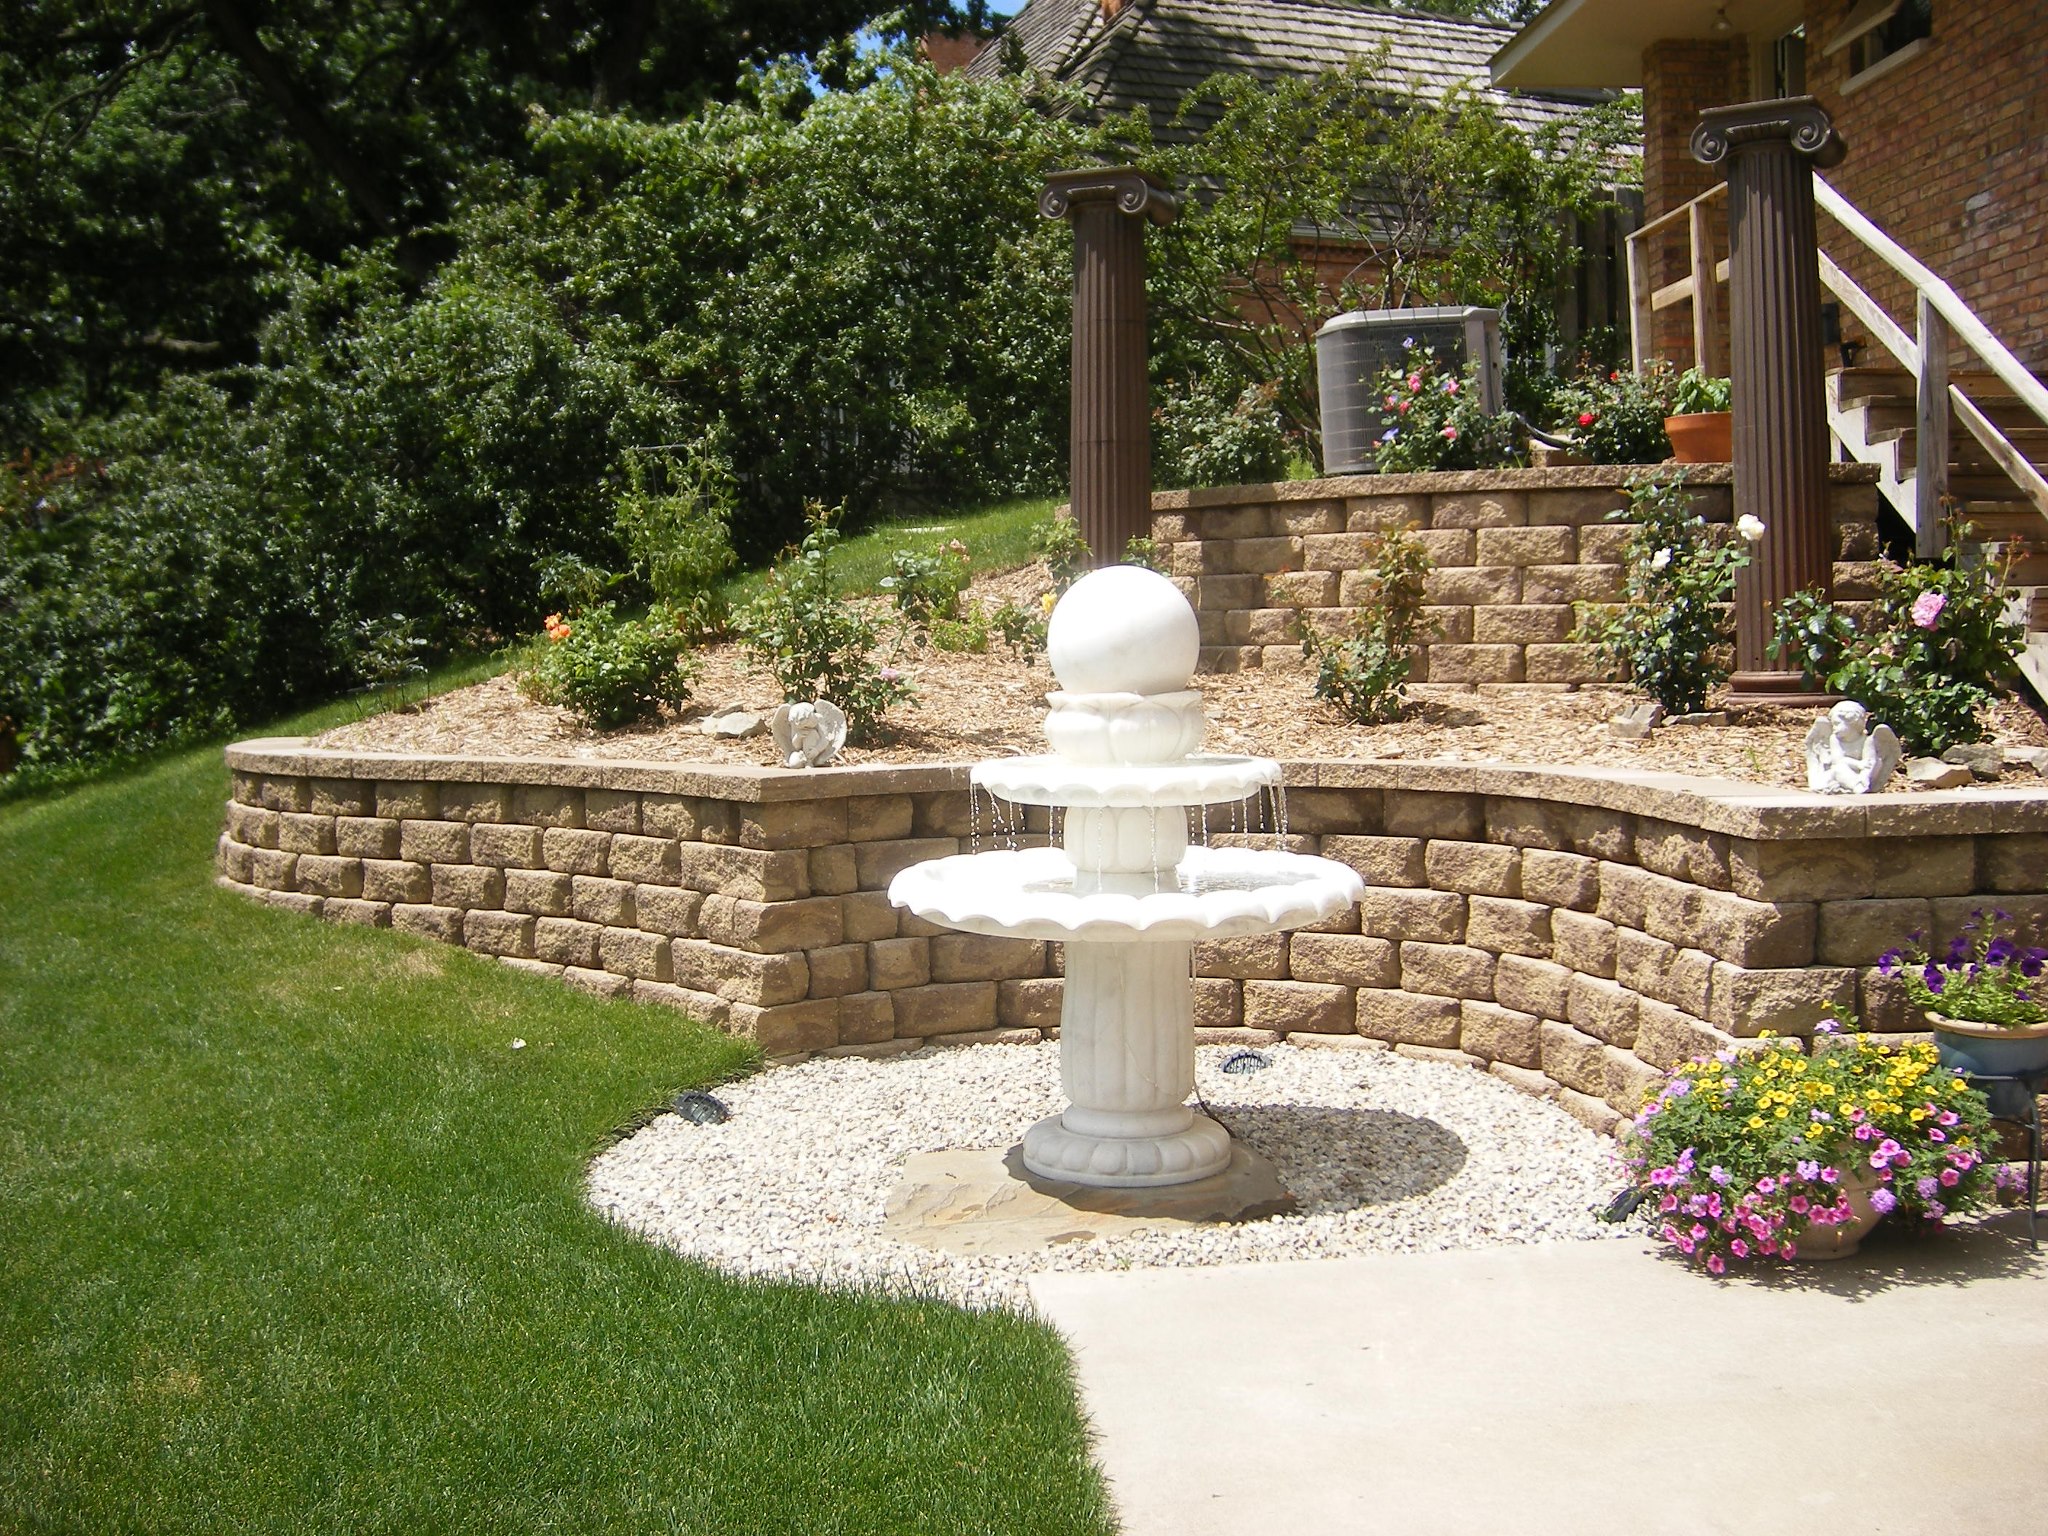 Terraced Retaining Wall and Fountain